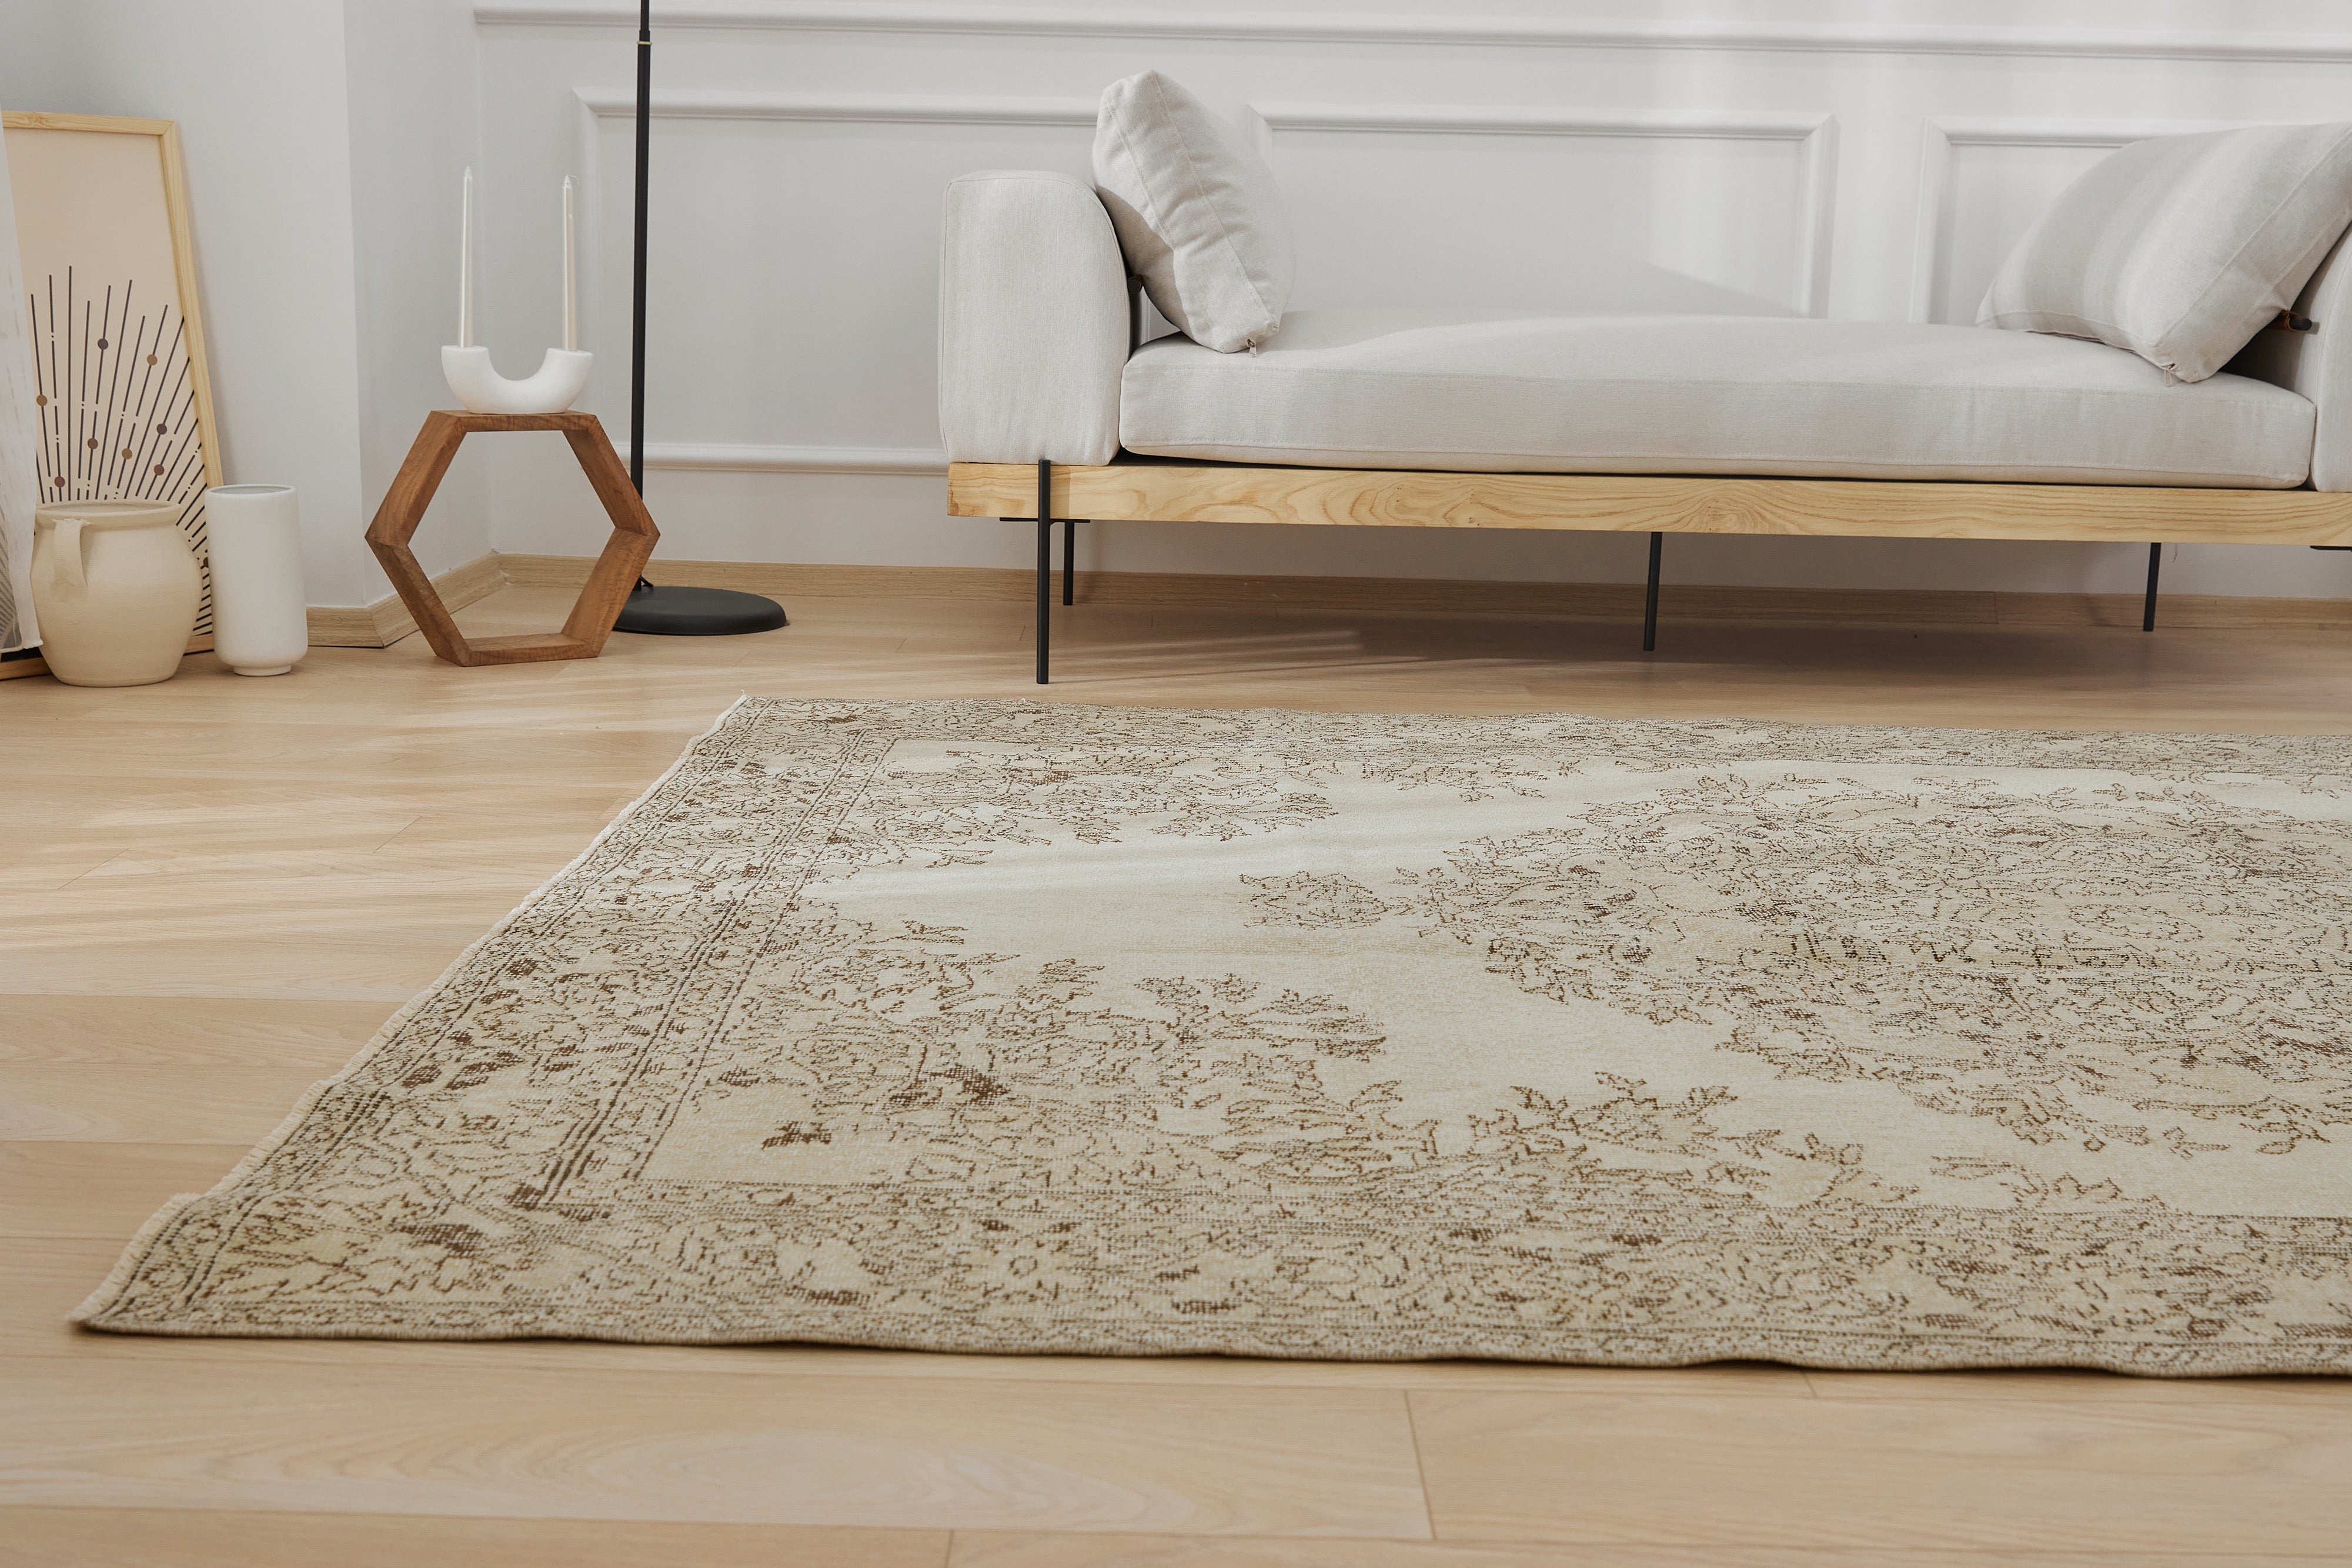 Harmony's Essence | Authentic Turkish Rug | Hand-Knotted Carpet | Kuden Rugs